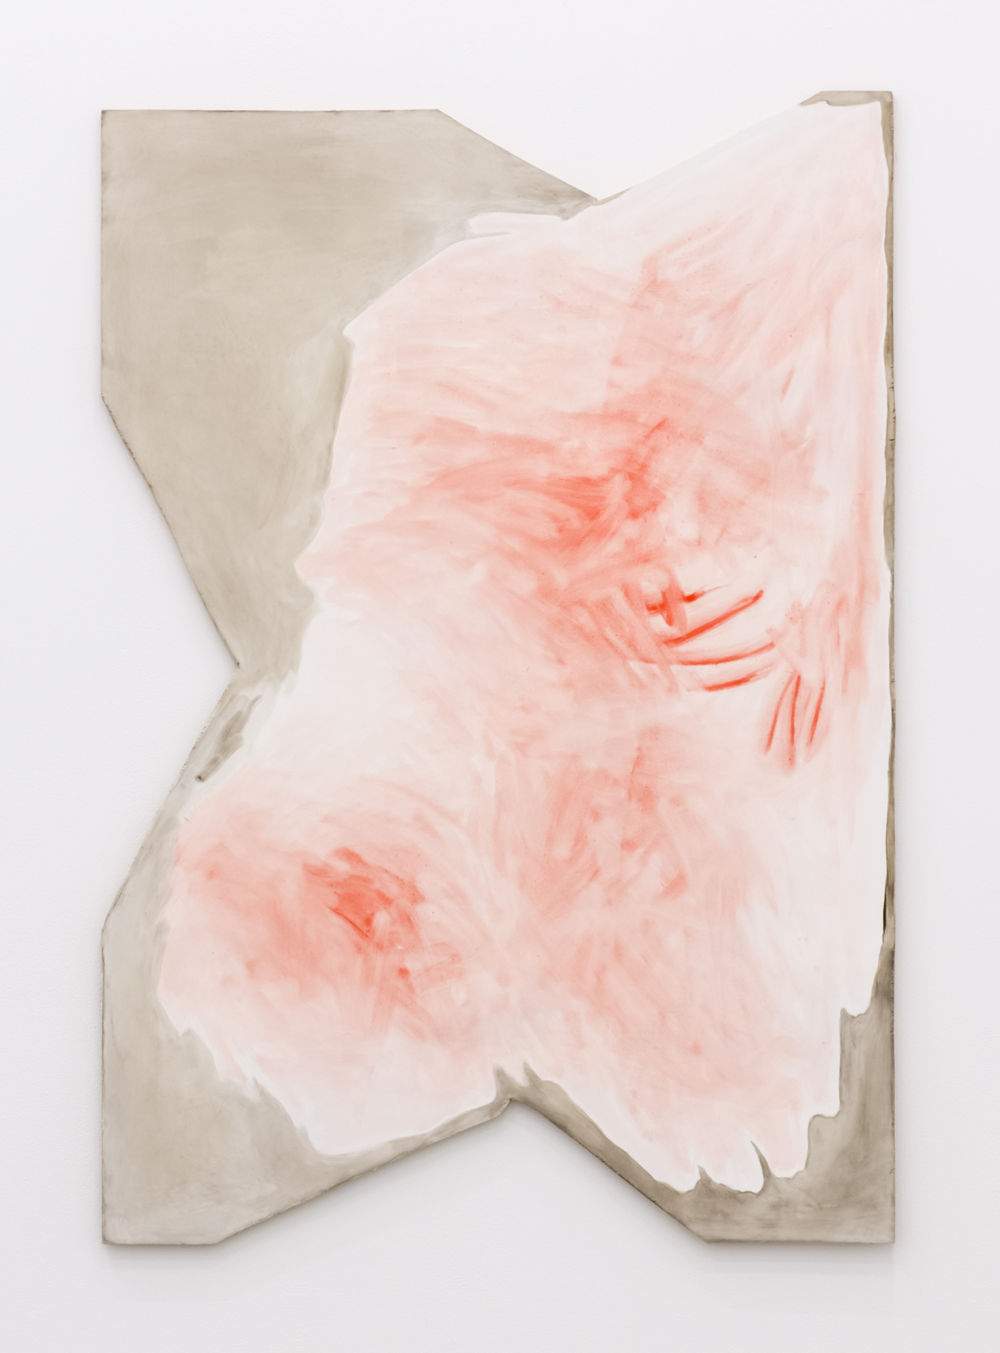 Monique Mouton, Rose, 2014, oil on wood panel, 48 x 33 in. (121 x 83 cm)  by 